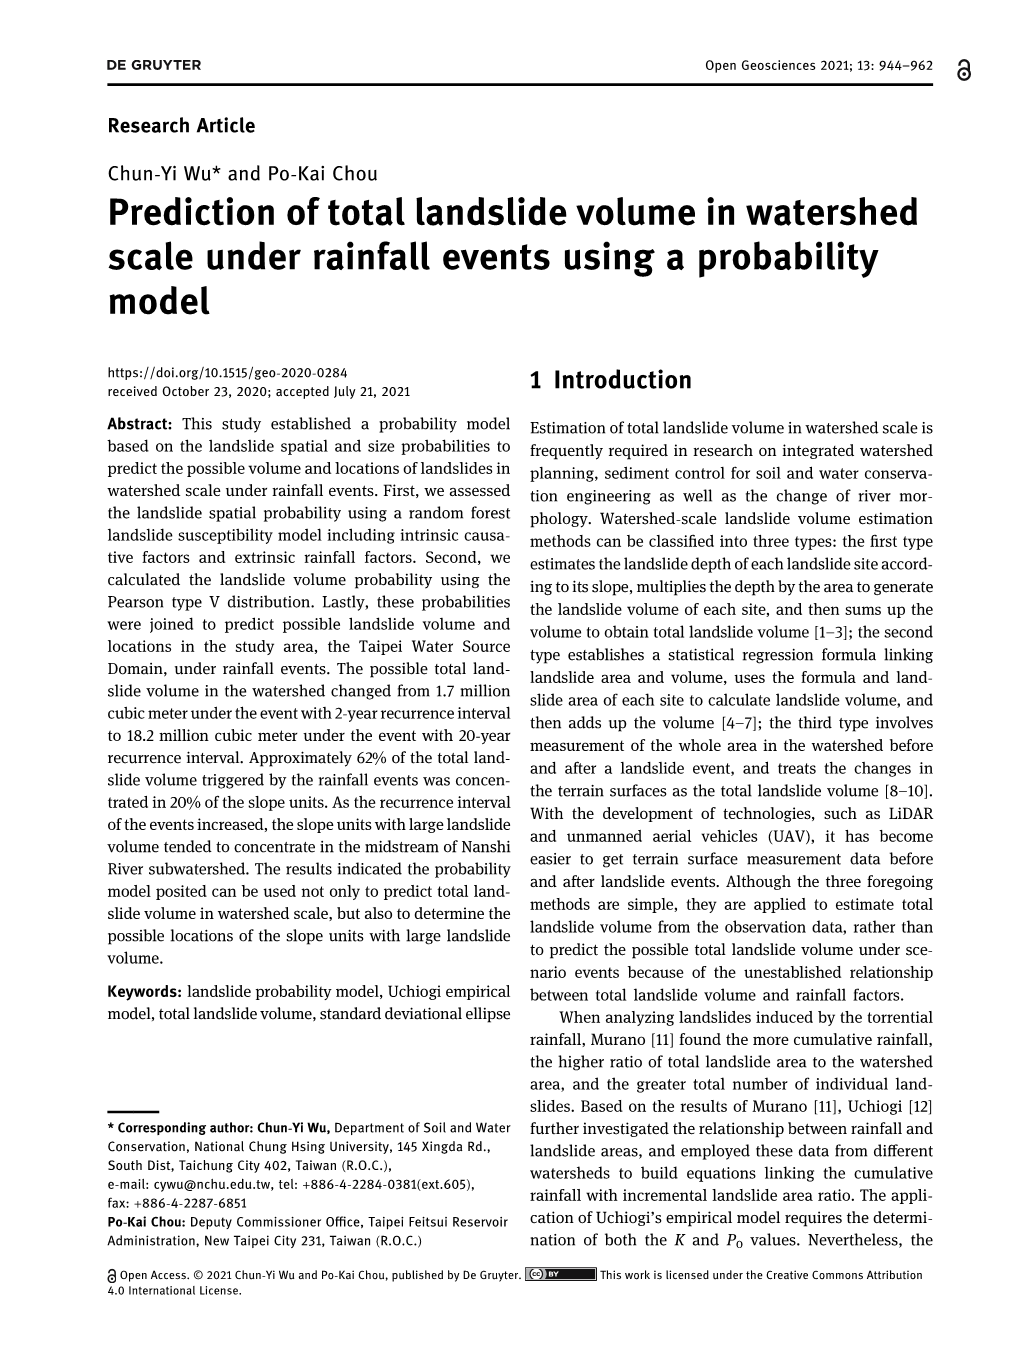 Prediction of Total Landslide Volume in Watershed Scale Under Rainfall Events Using a Probability Model